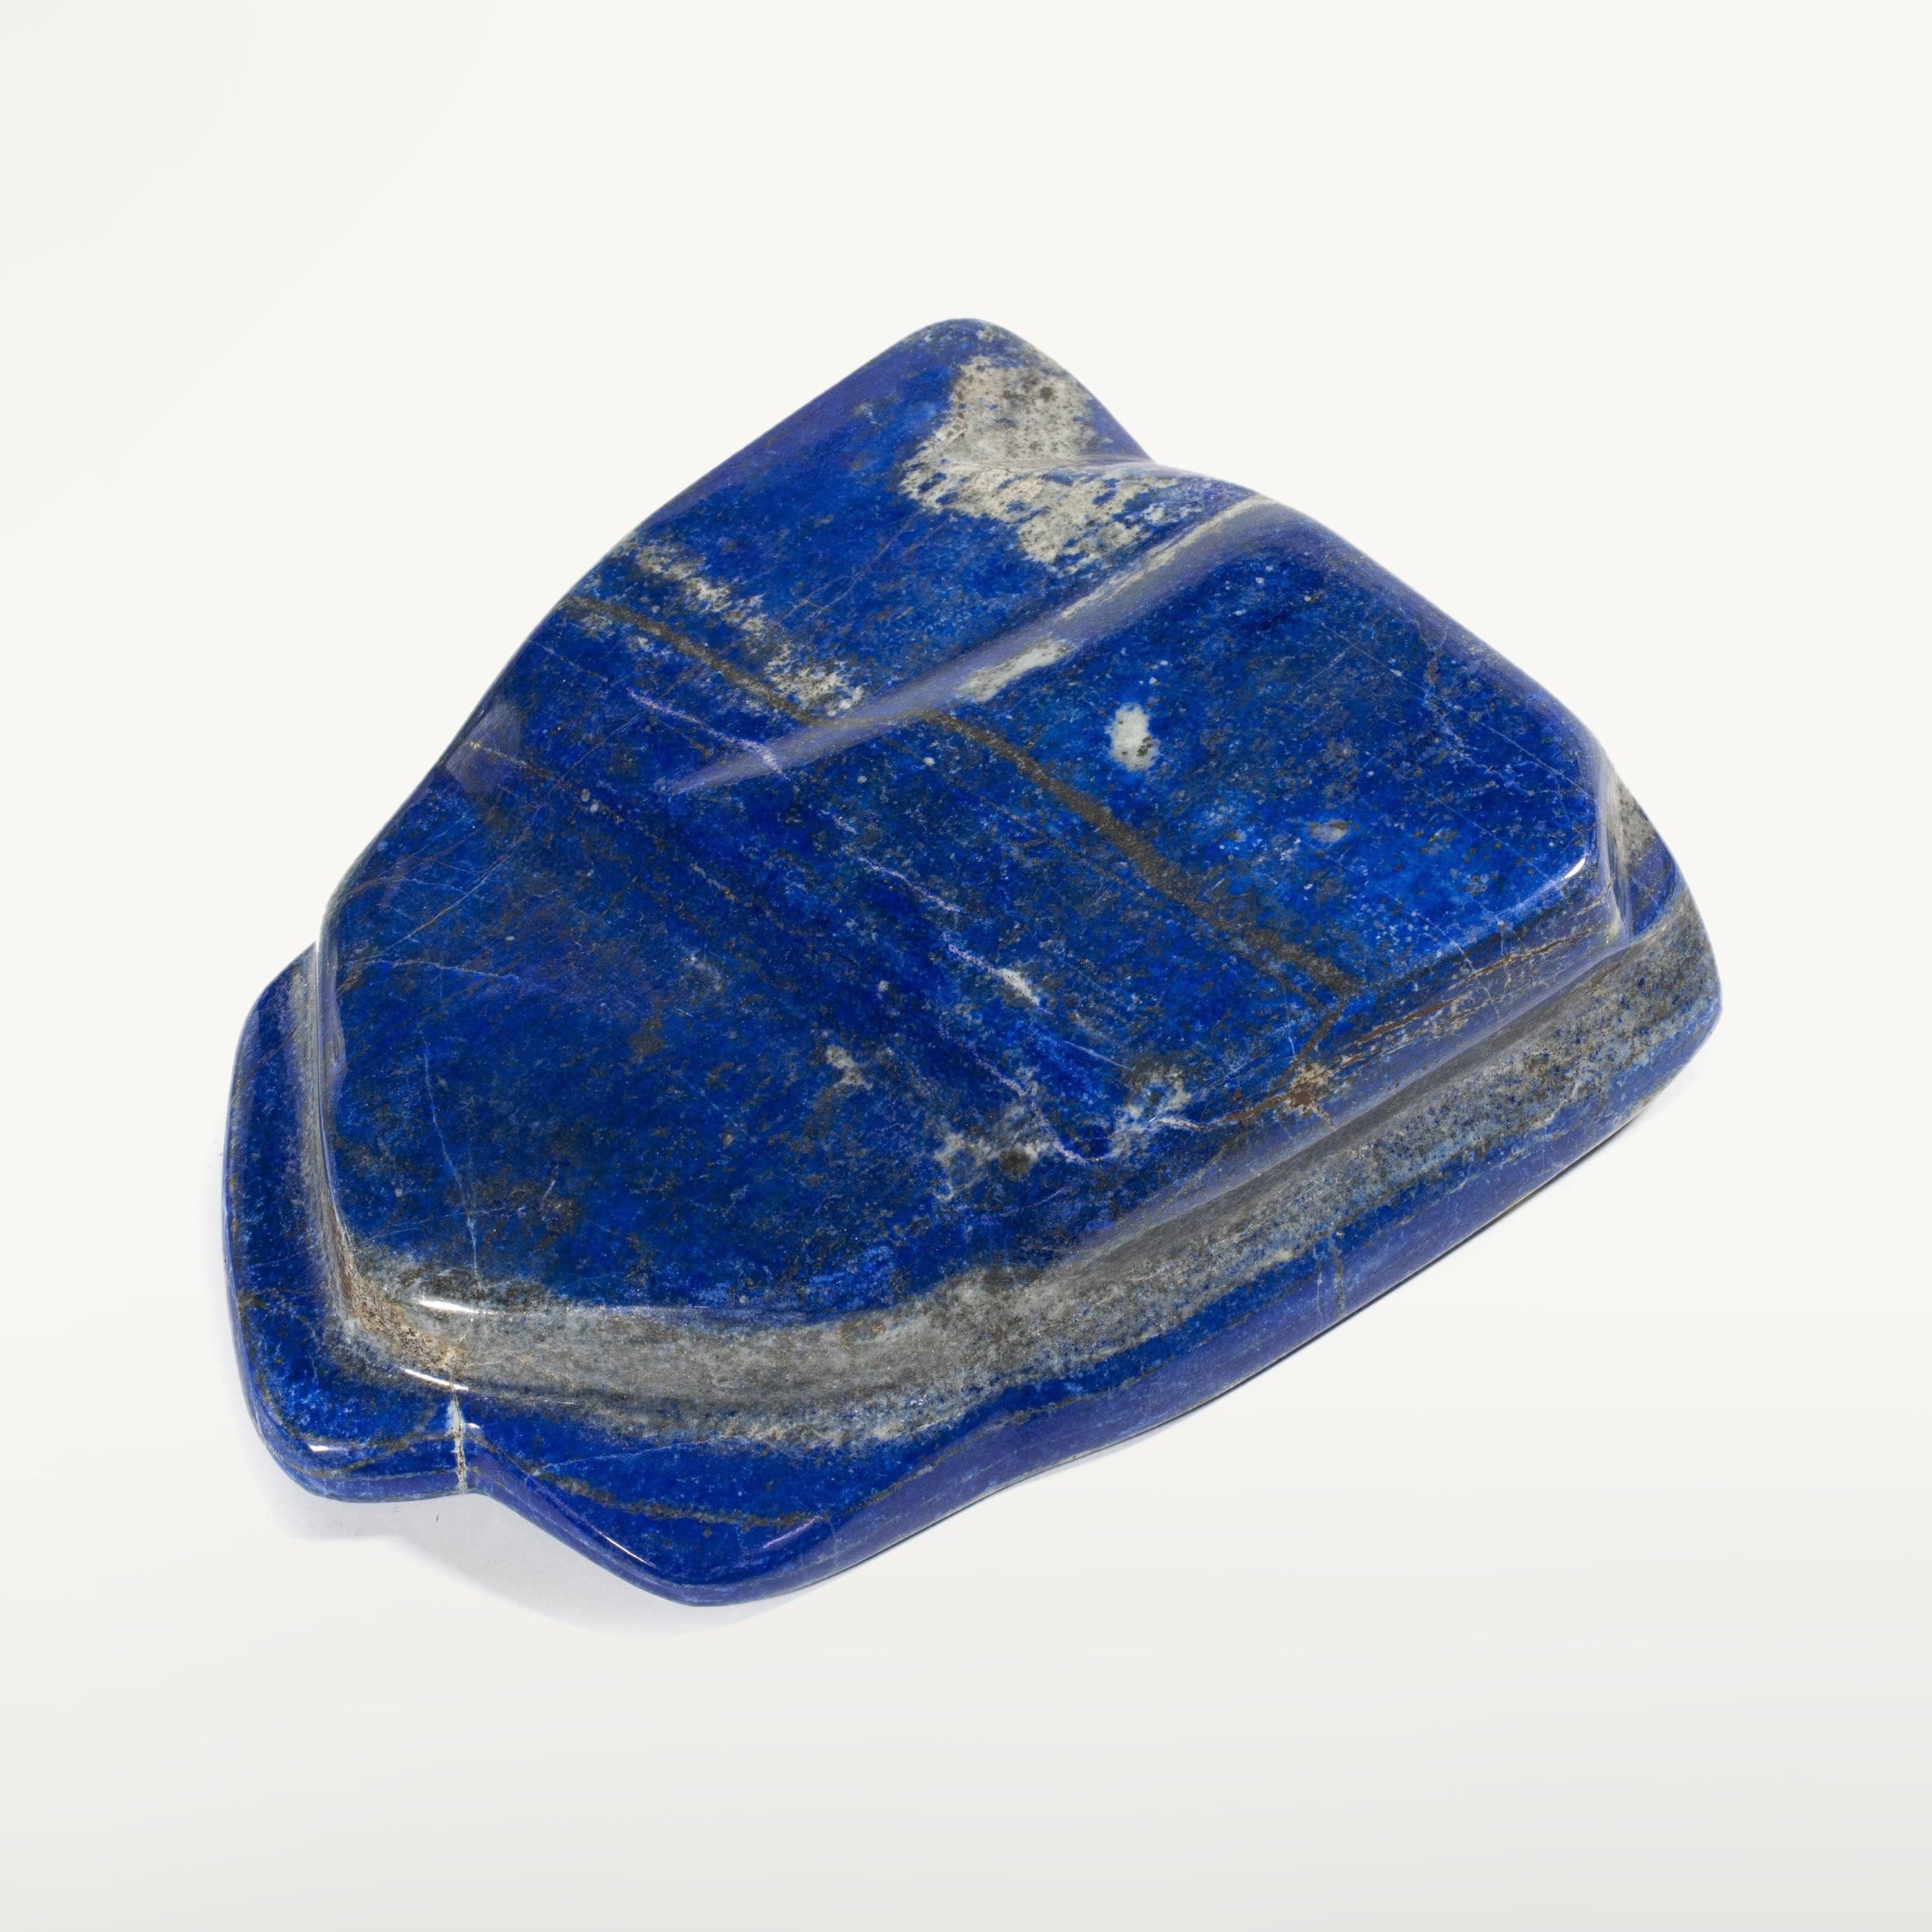 Kalifano Lapis Rare Natural Blue Polished Lapis Lazuli Freeform Carving from Afghanistan - 2440 g / 5.4 lbs LPS2500.001